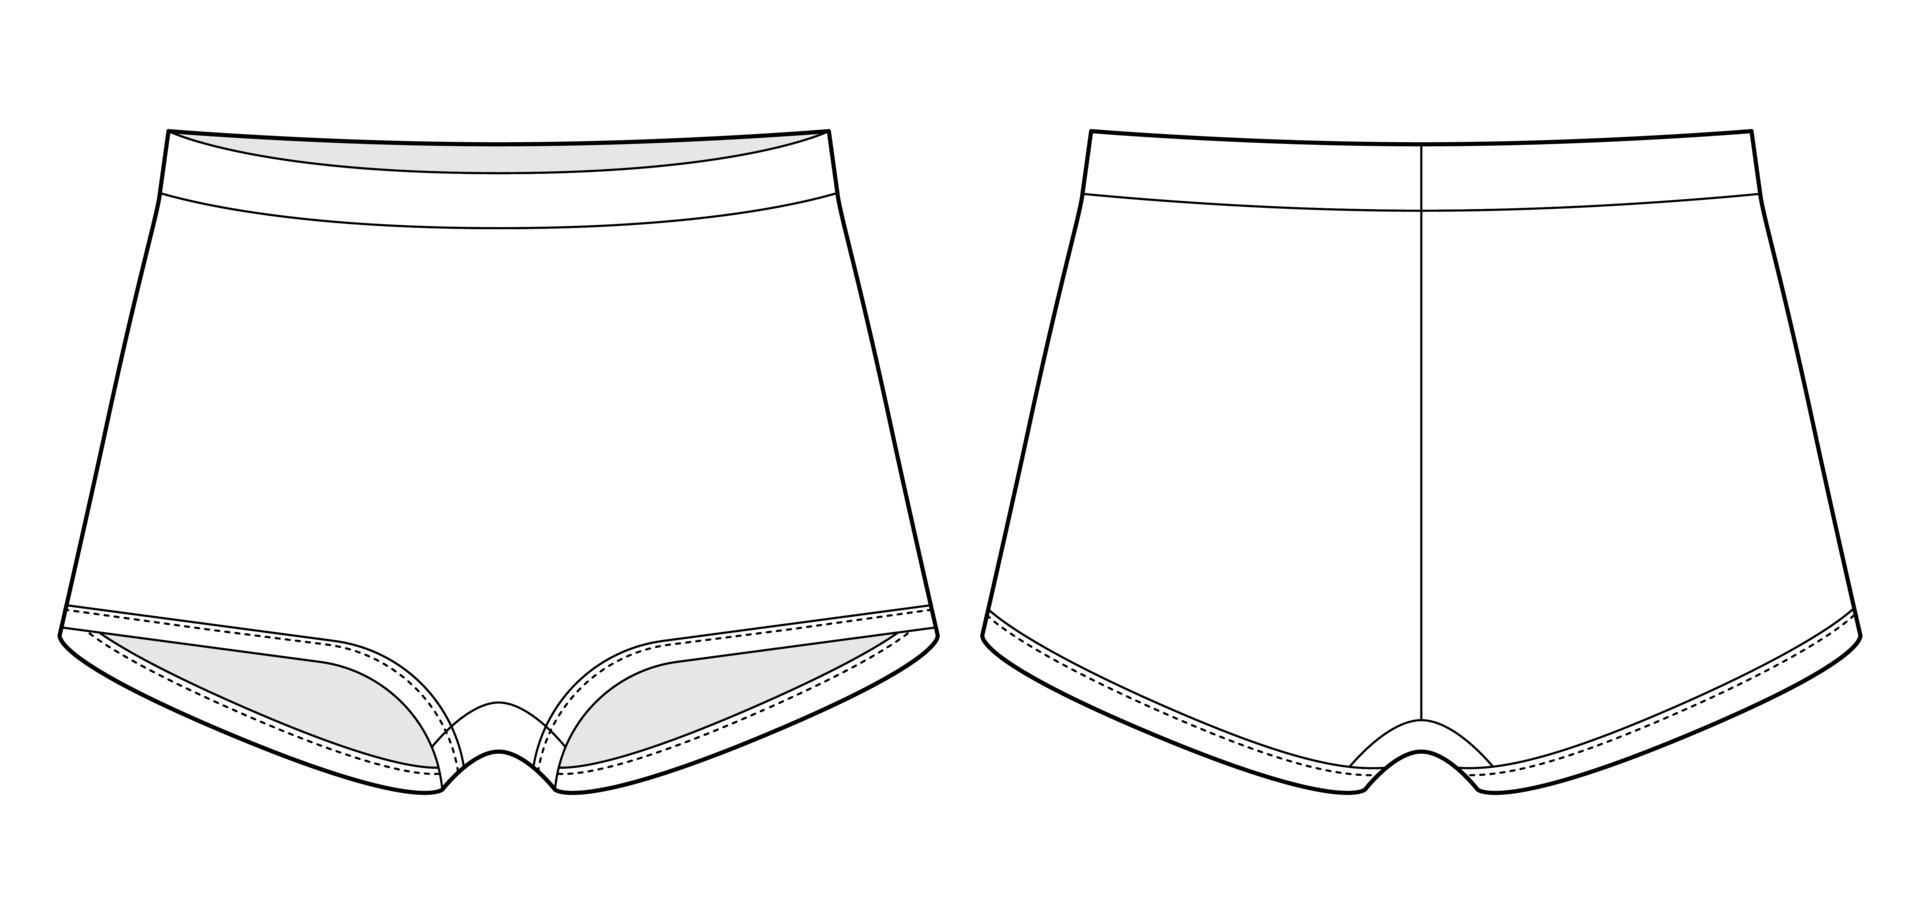 Blank girls knickers technical sketch. Lady lingerie. Female white